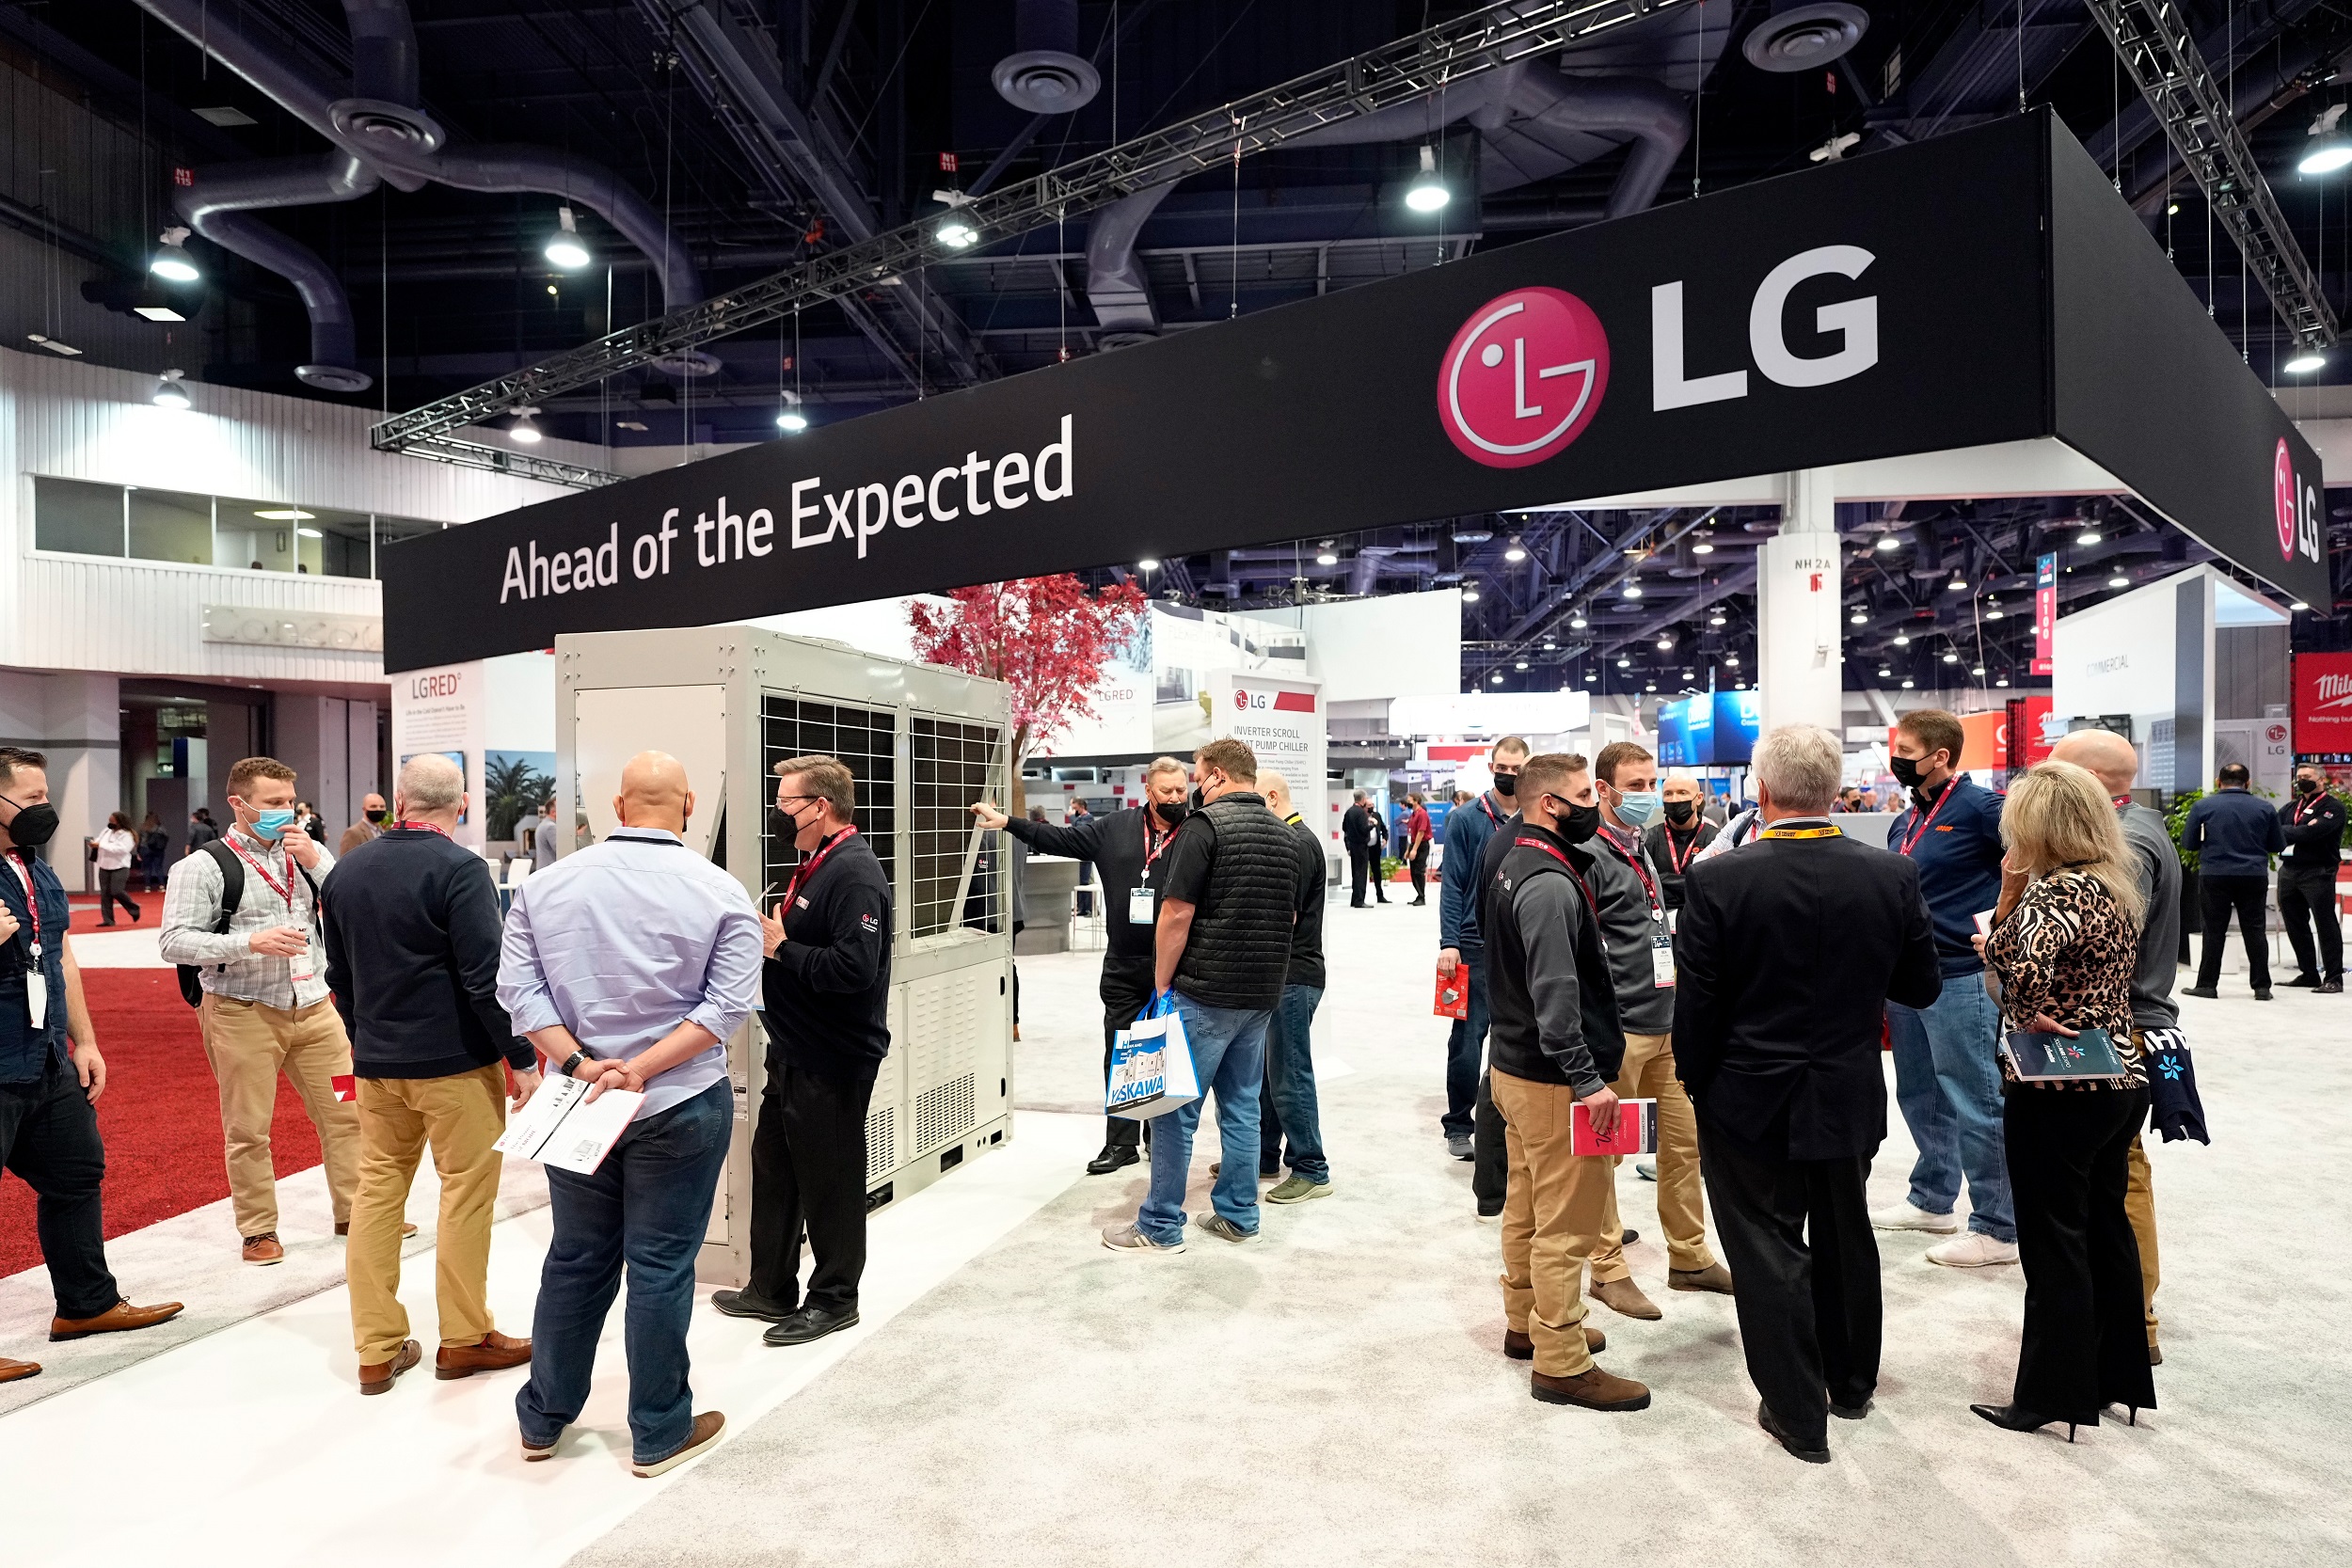 Many participants of AHR Expo visiting LG Booth at the event